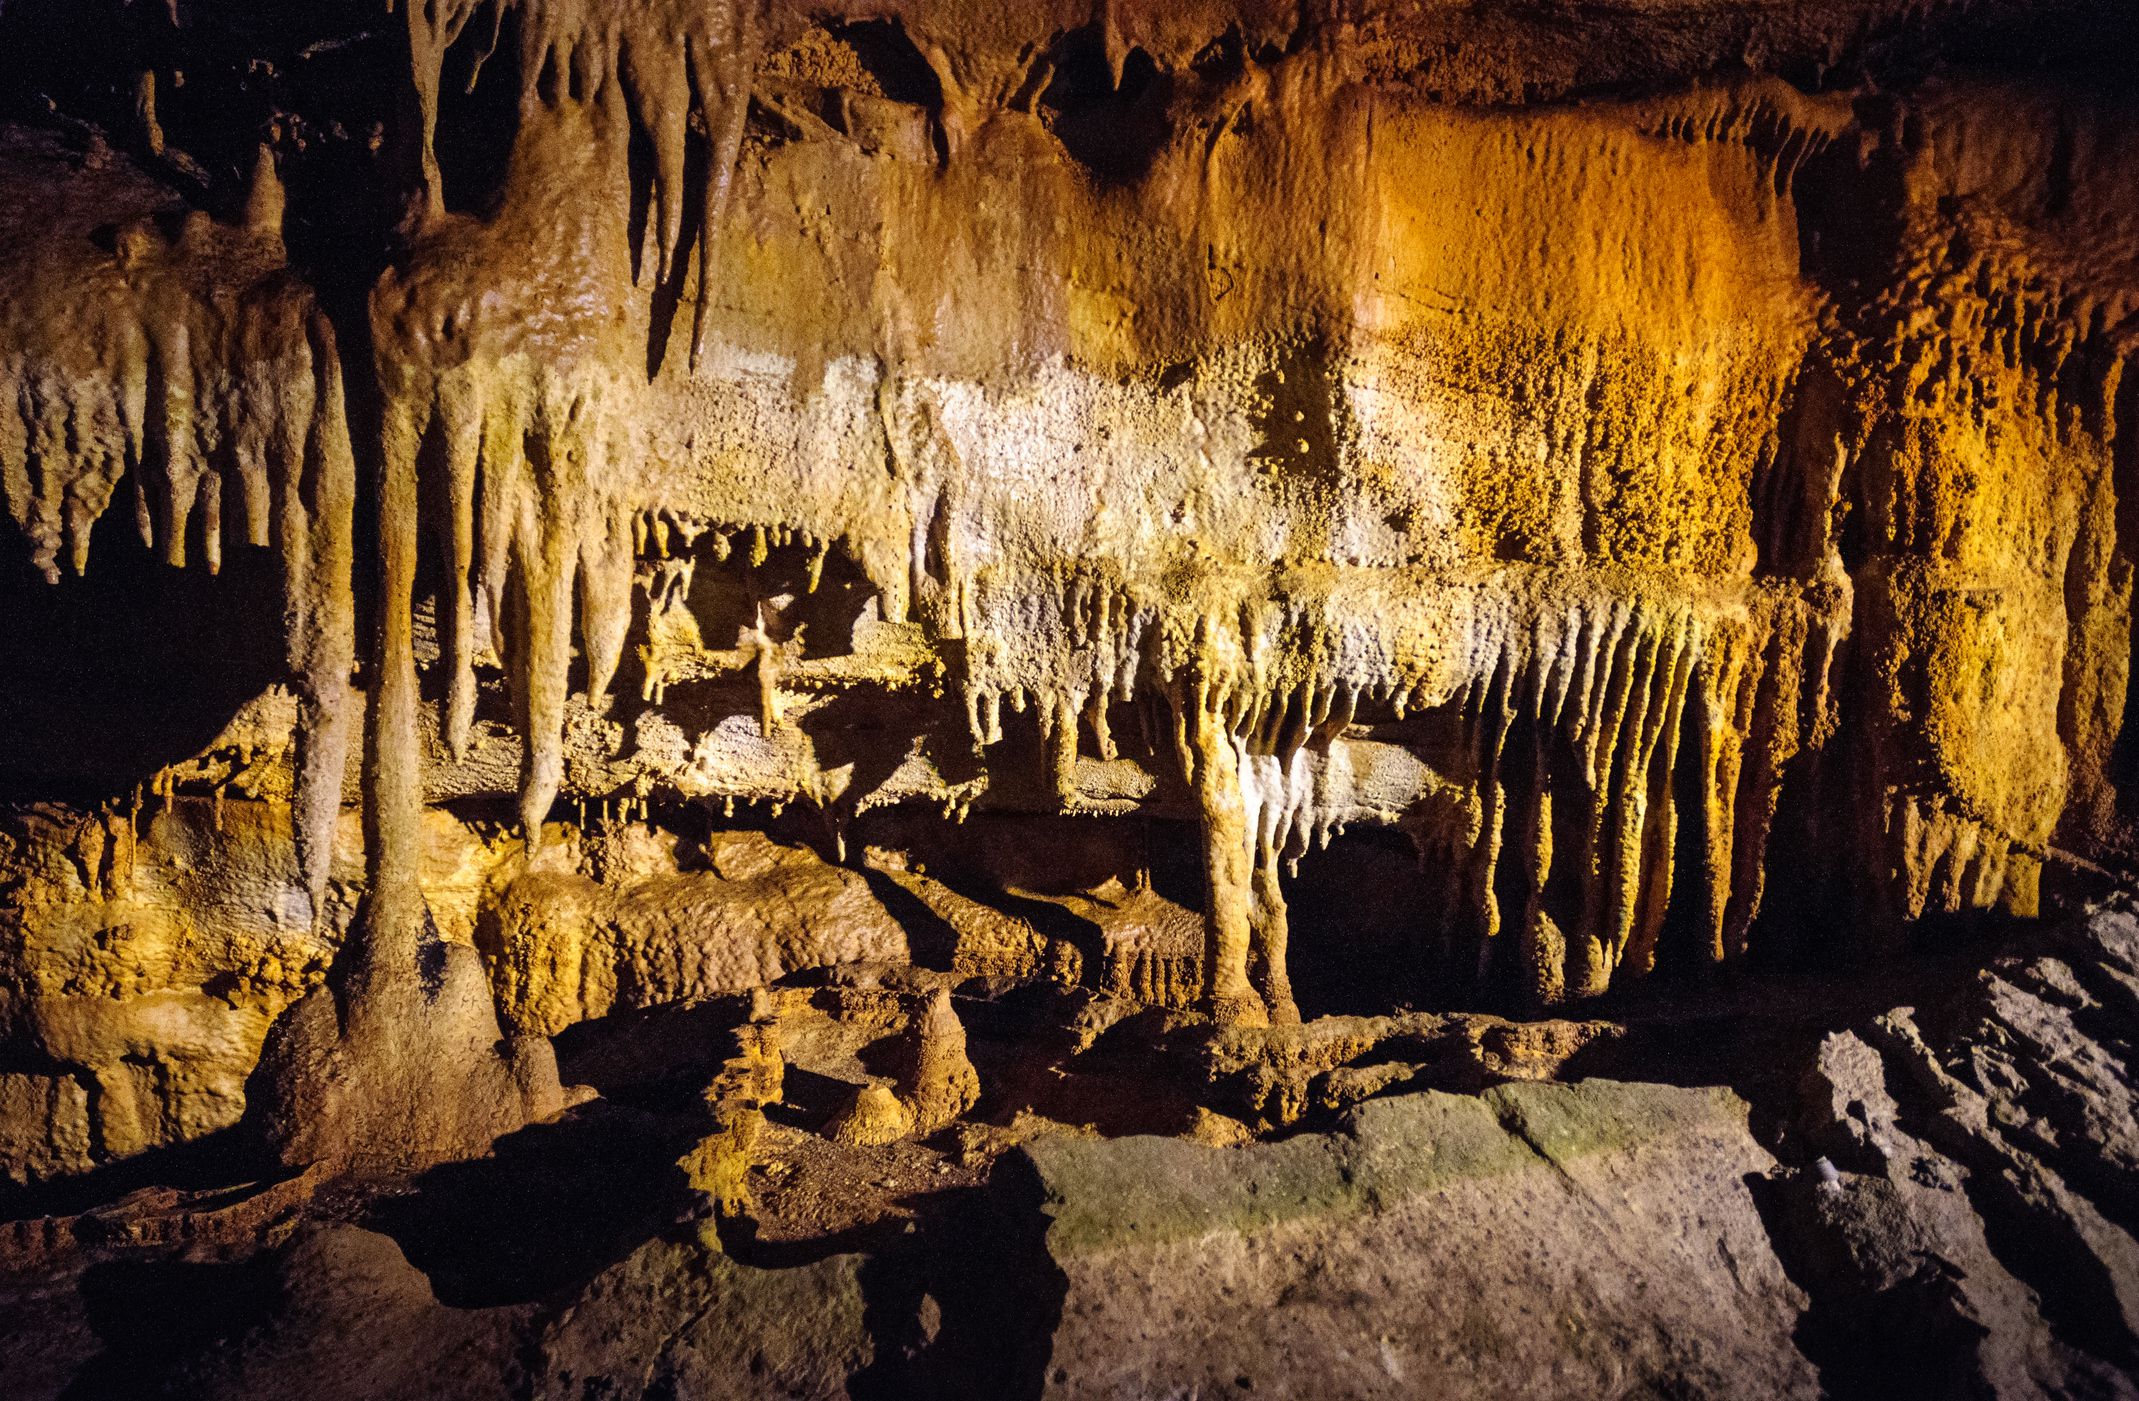 <p>Some of the <a href="https://blog.cheapism.com/under-the-radar-national-parks/">coolest spots you’ve never heard of</a> may lie right beneath your feet. From one-of-a-kind caves to commuter walkways to “underground cities” from the early 1900s, there are many places to find adventure below ground. Some of these are free to explore, while other sites collect an entrance fee. Have you been to one of these fascinating subterranean spaces? Please share your experience in the comments.</p>  <p><b>Find more must-read stories on the best travel ideas</b> with <a href="https://chrome.google.com/webstore/detail/cheapism-search-and-save/gfbmlcdfkpoiofencnmkkdcmklakicck">Cheapism Search and Save</a>.</p>